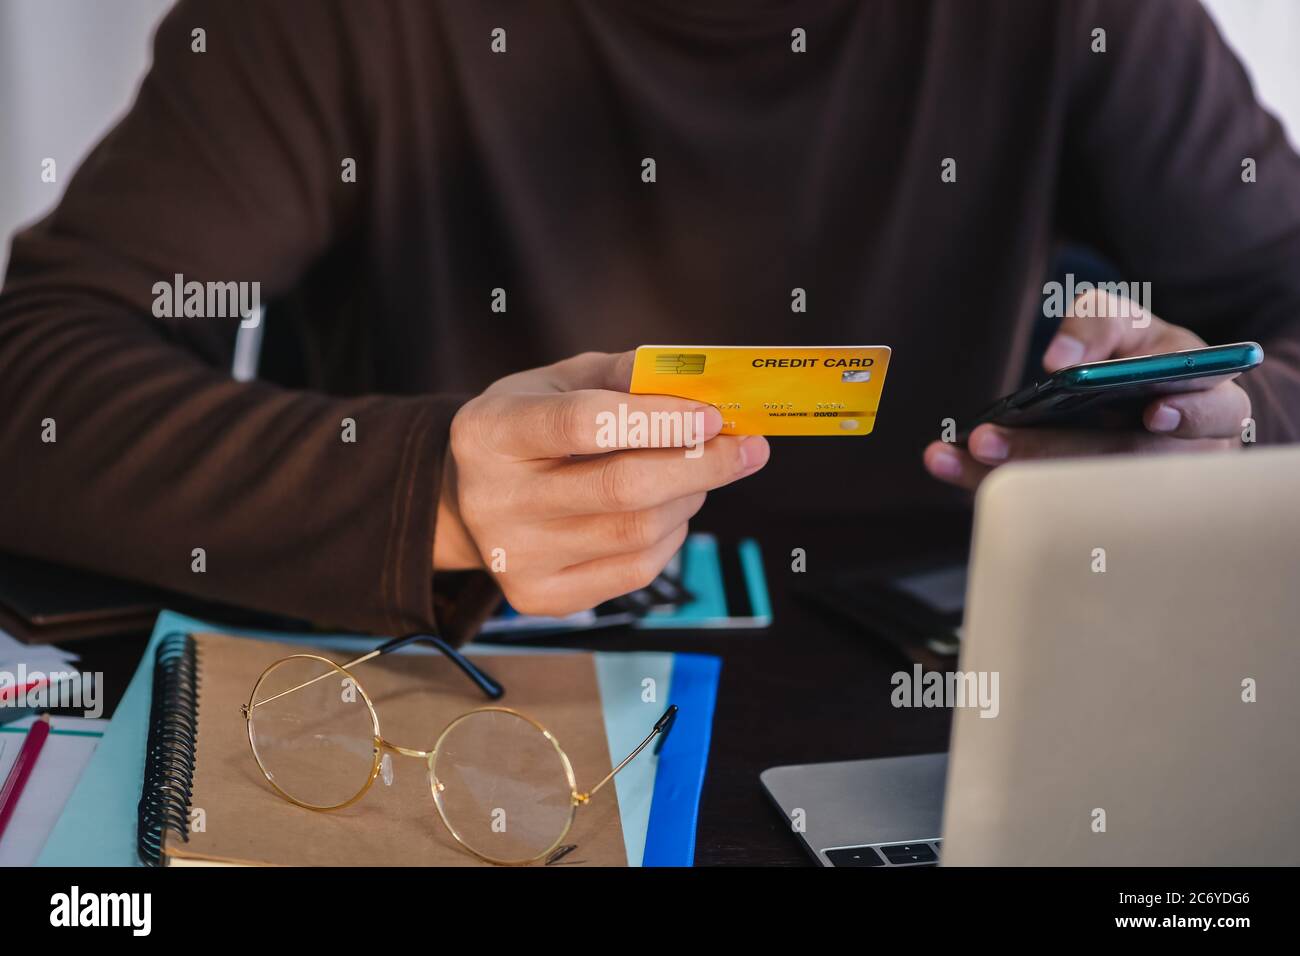 Man paying with credit card on smart phone at home office shopping, banking, home and lifestyle concept Stock Photo